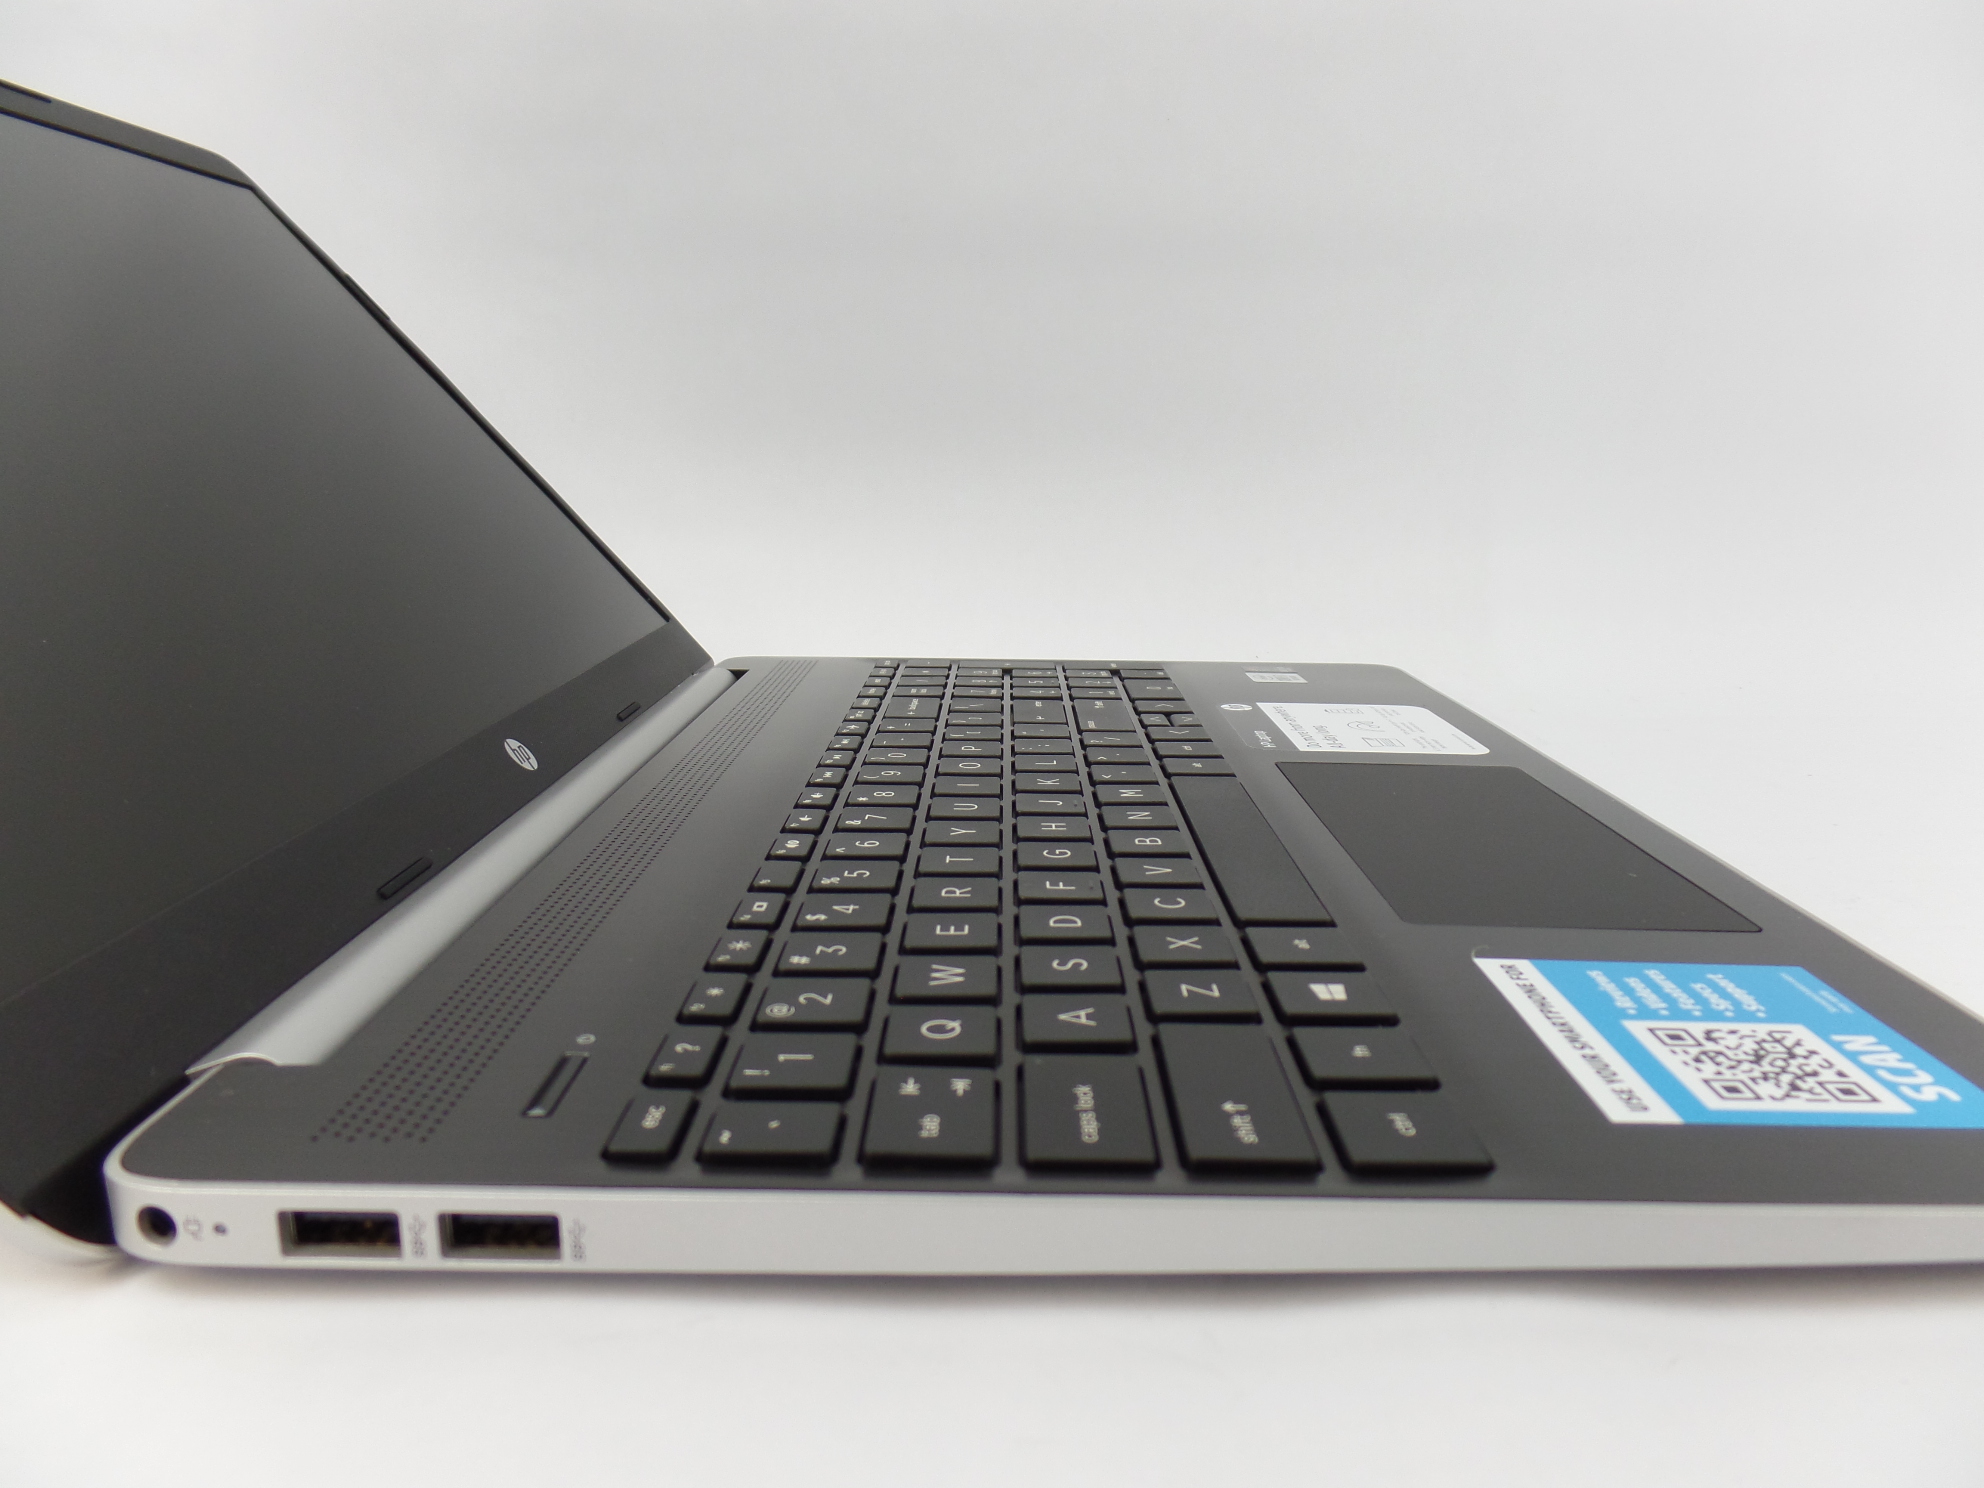 Used (good working condition) HP 15-dy1078nr 15.6" HD i7-1065G7 1.3GHz 8GB 256GB SSD Iris Plus W10H Laptop SD - image 5 of 6